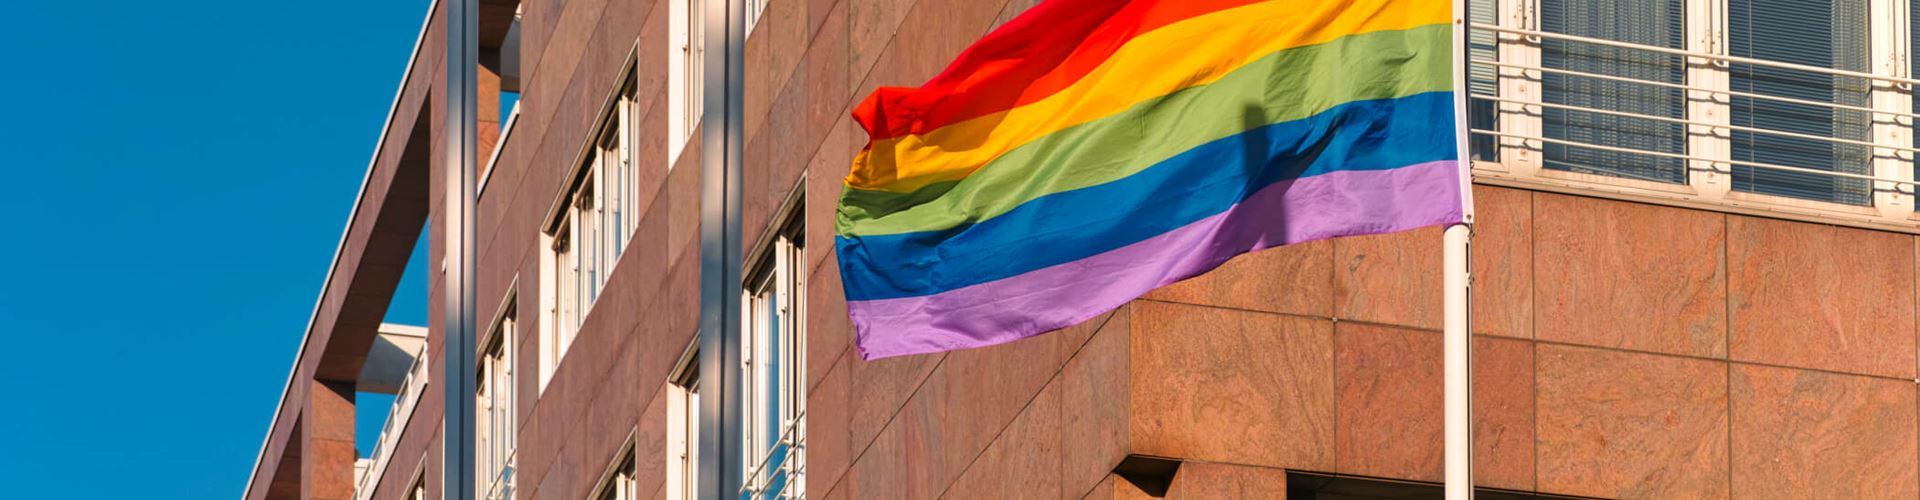 Three Big Four firms praised for being LGBT-friendly